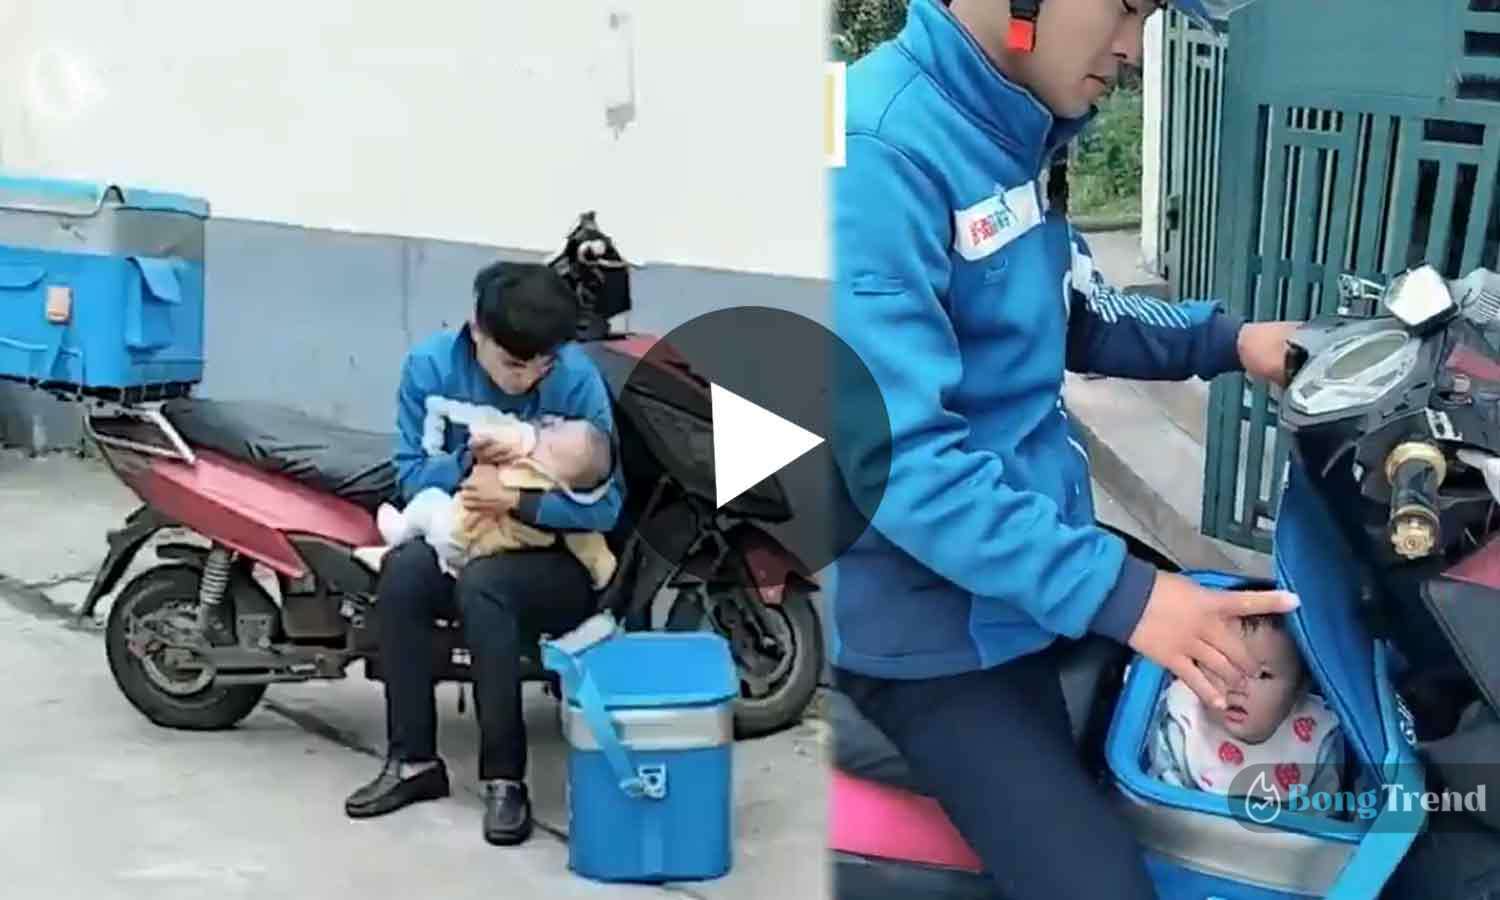 Delivery Boy with baby in Scooty